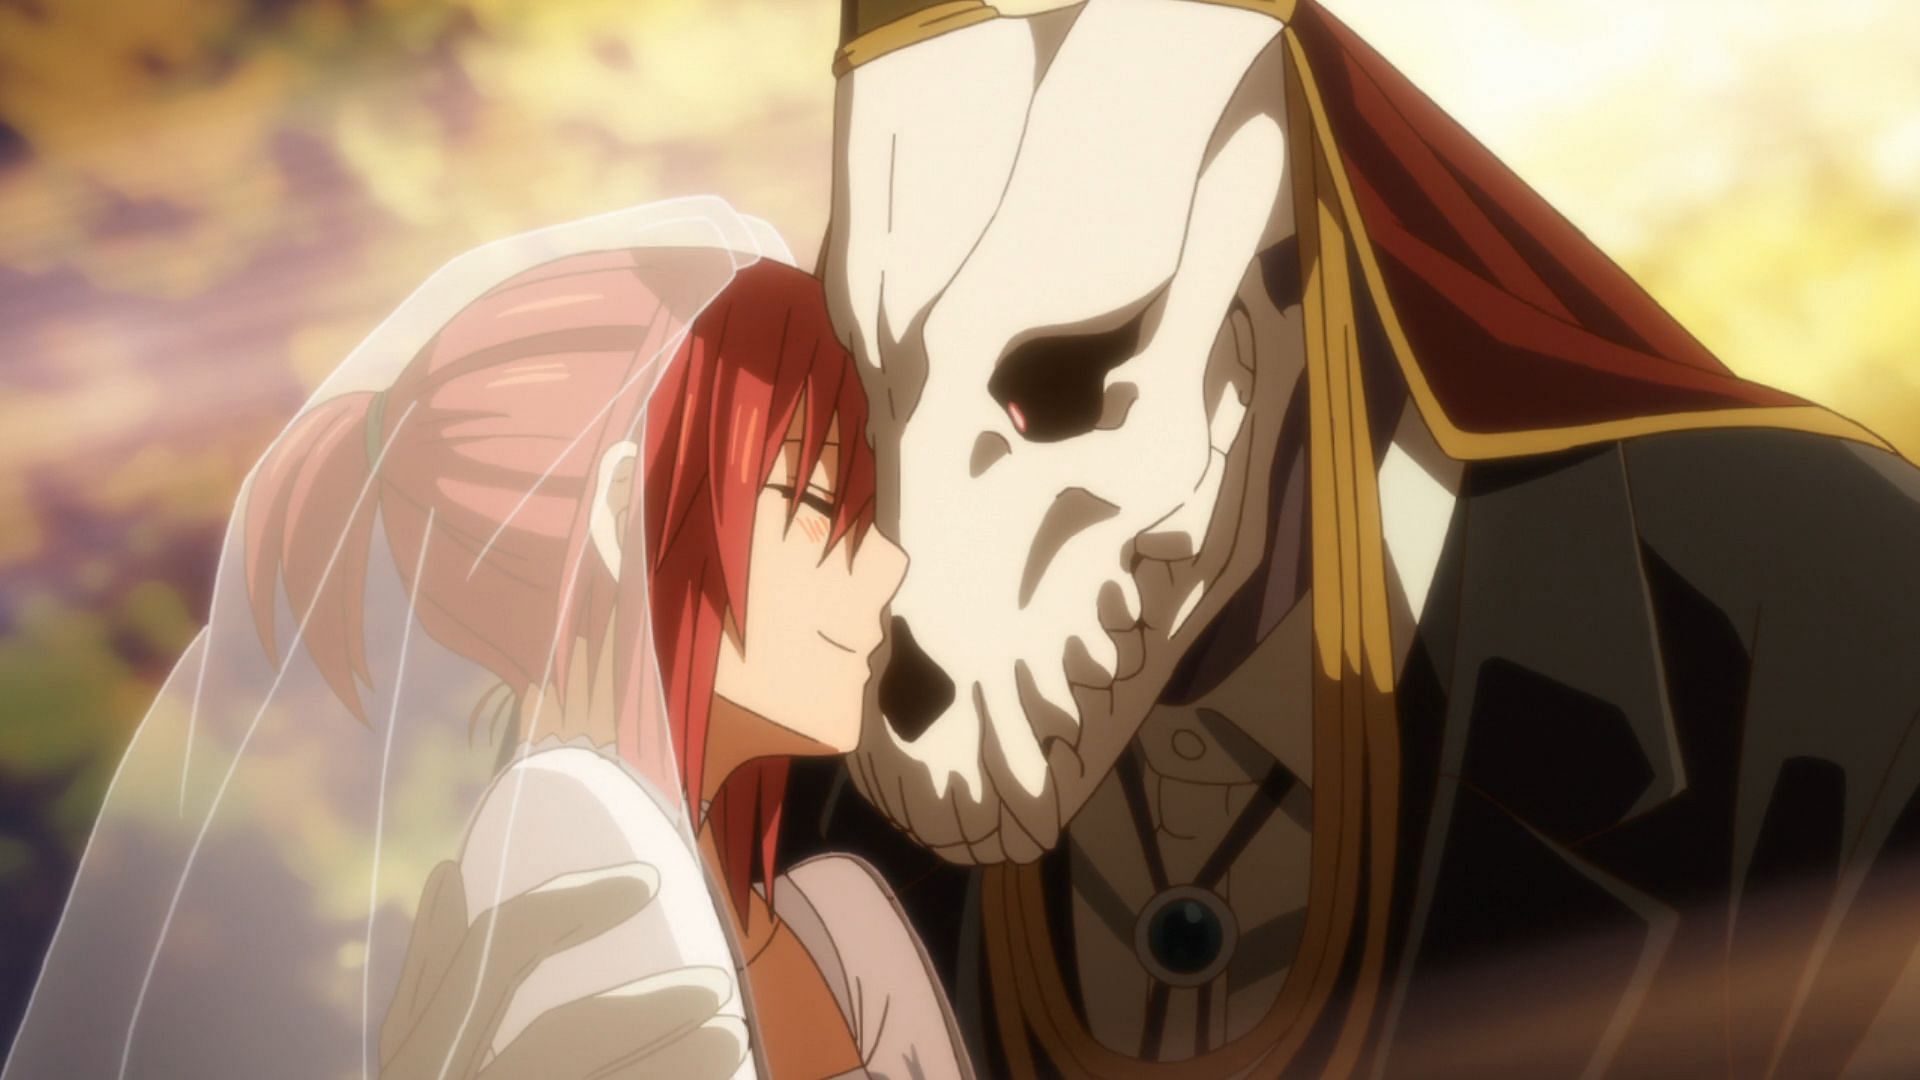 Chise learns what it truly means to be Elias